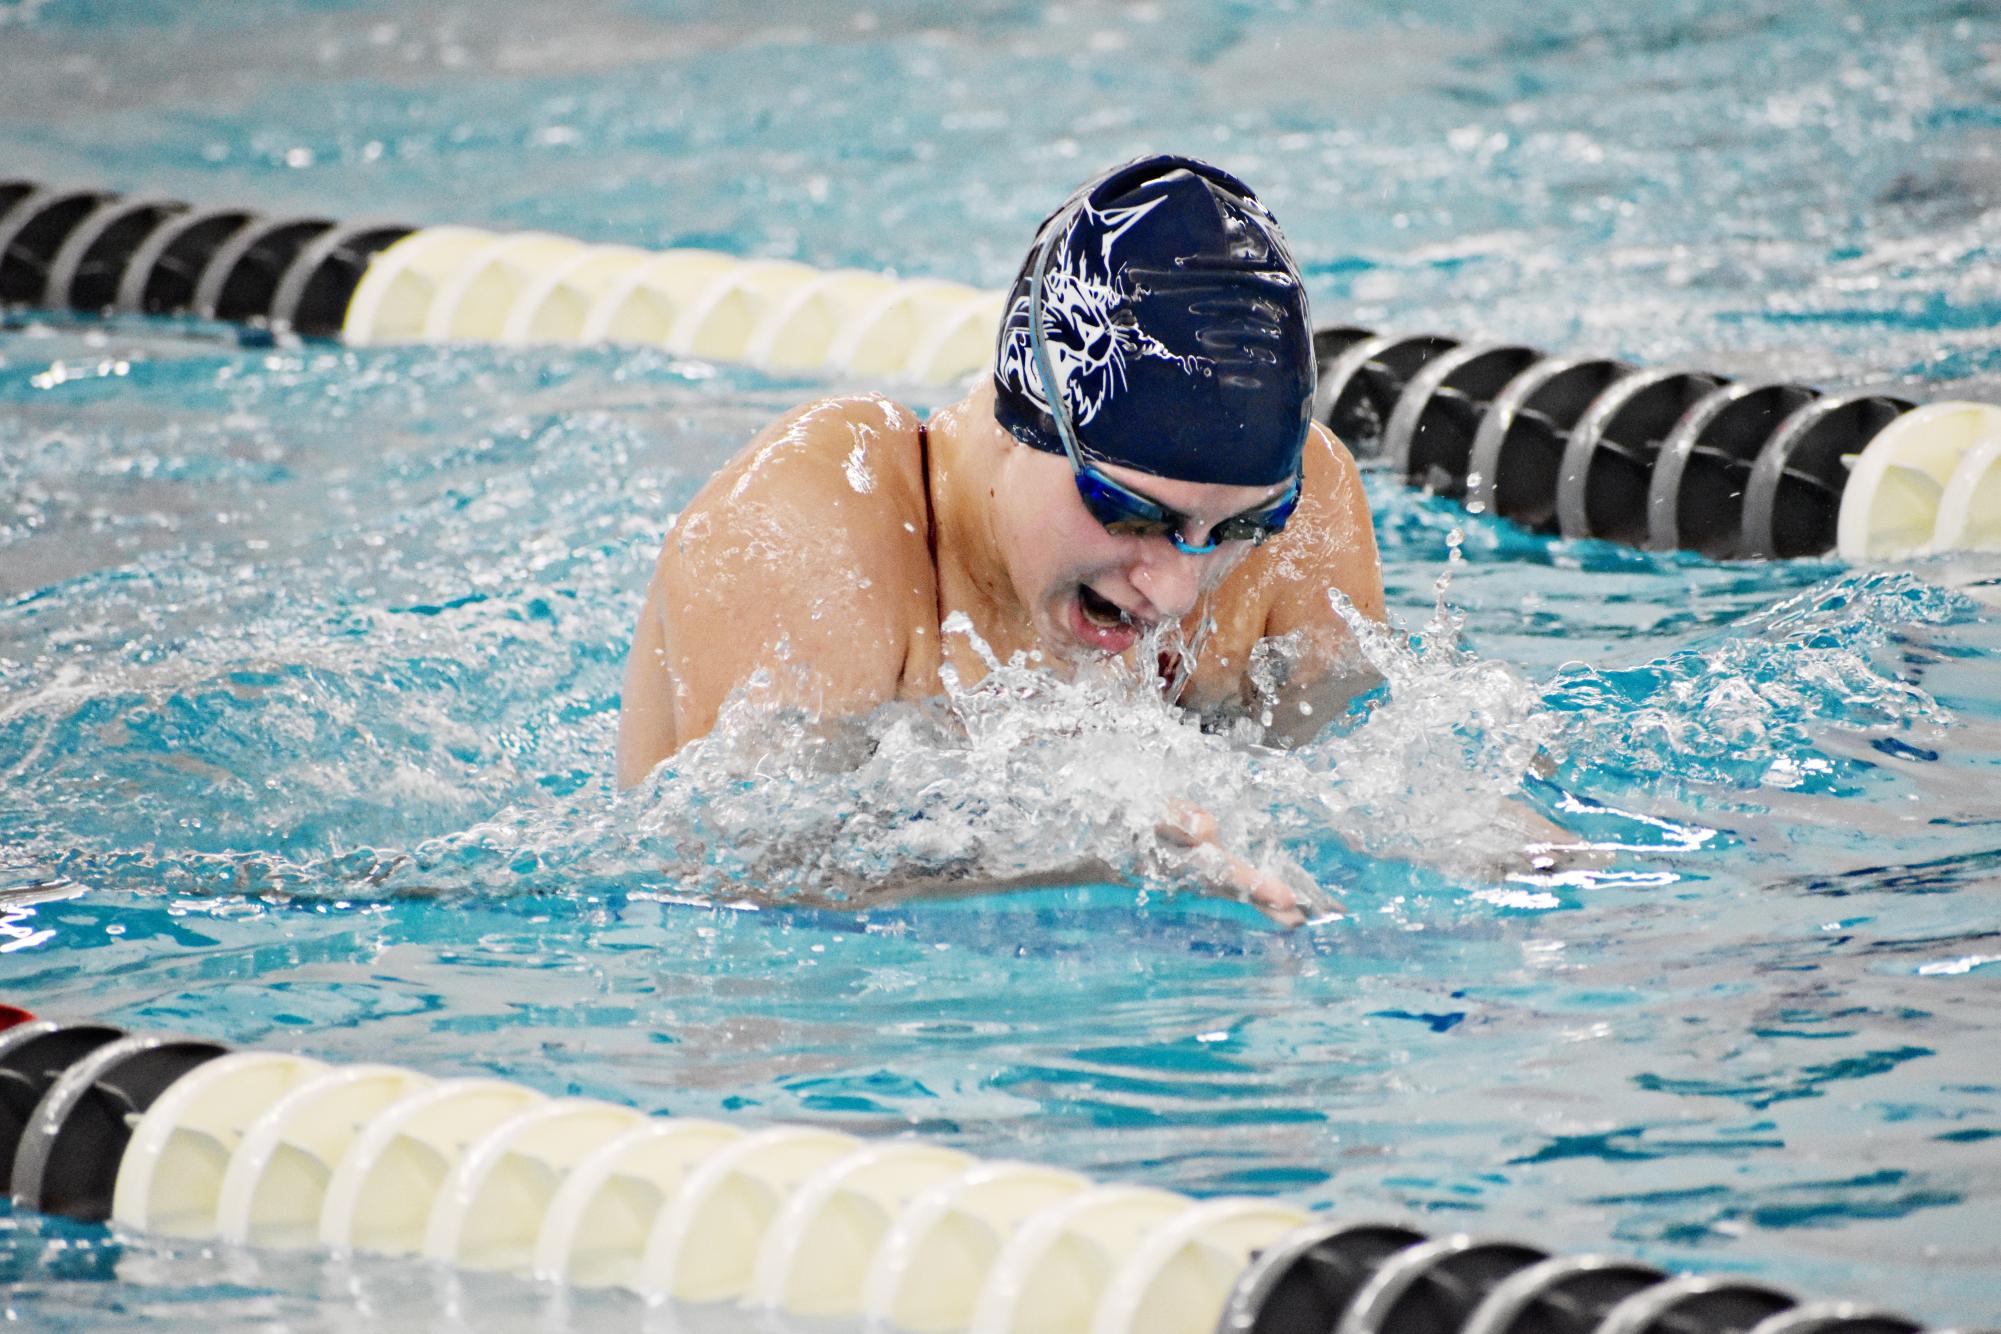 Keeping her line tight, sophomore Audrey Lindstrom from Batavia races in the breaststroke.